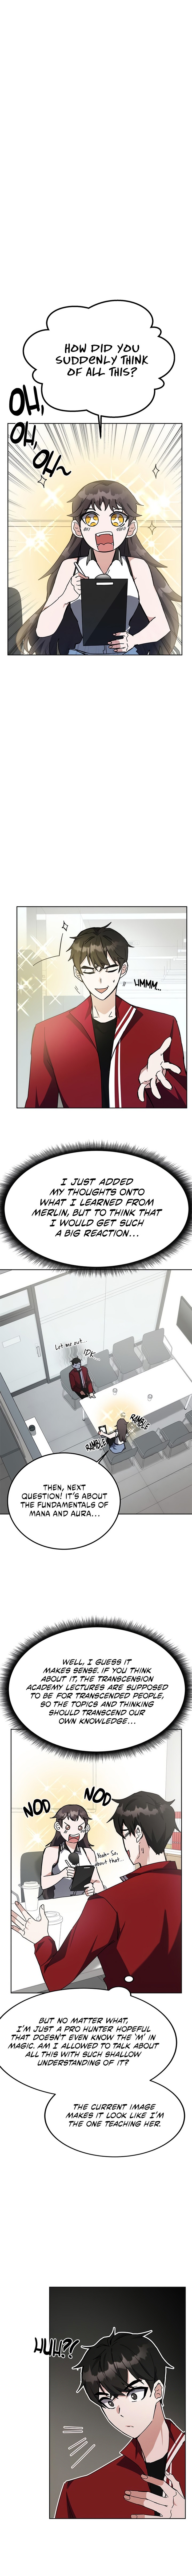 Transcension Academy Chapter 26 Page 1